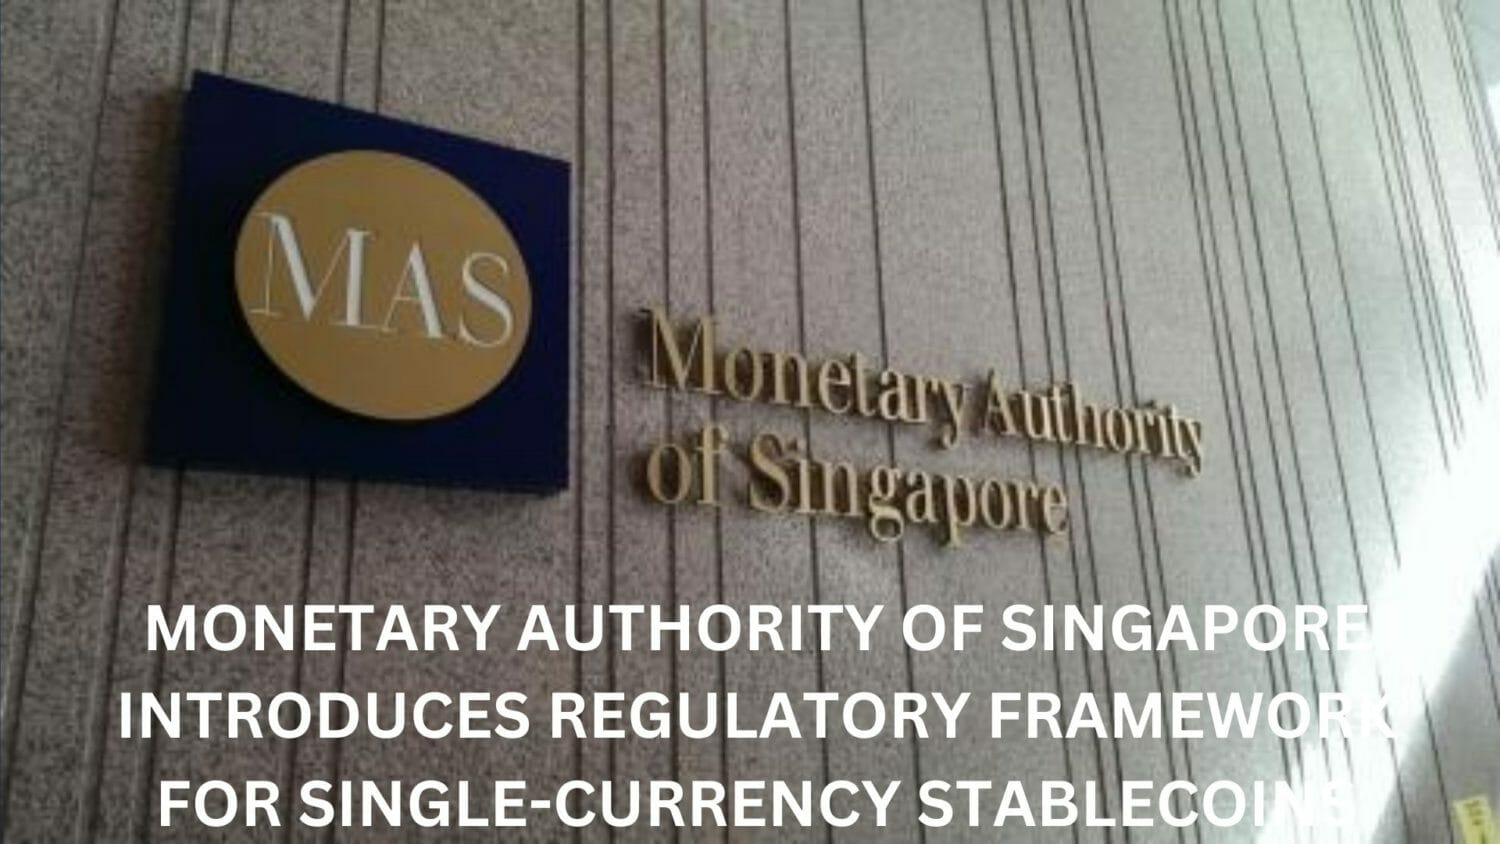 Monetary Authority Of Singapore Introduces Regulatory Framework For Single-Currency Stablecoins